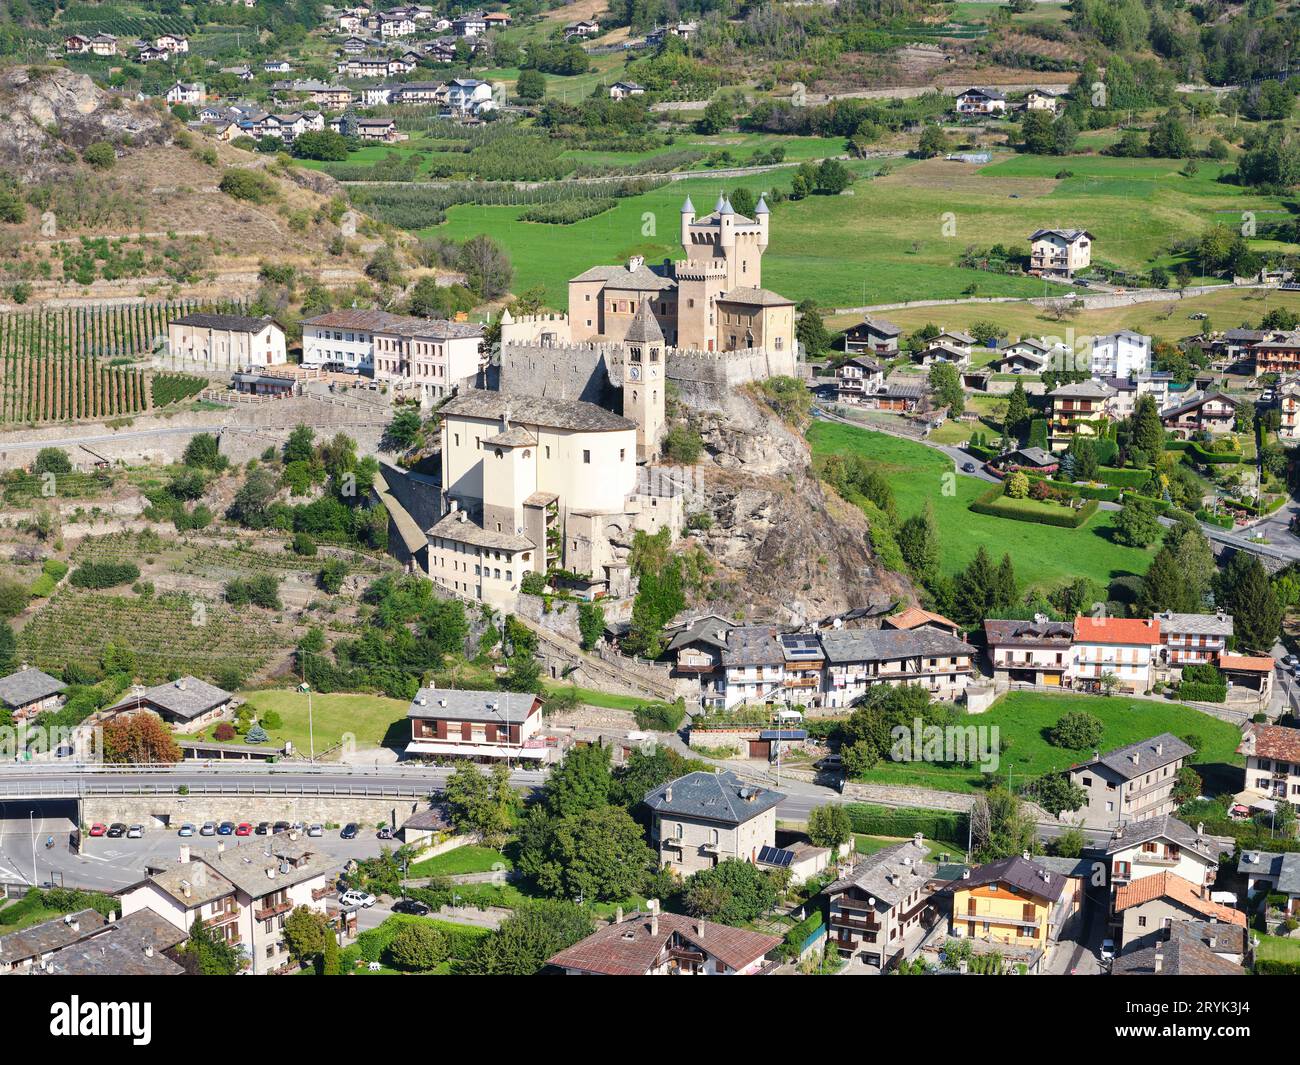 AERIAL VIEW. Saint-Pierre Castle and Parish Church on a rocky outcrop. Saint-Pierre, Aosta Valley, Italy. Stock Photo